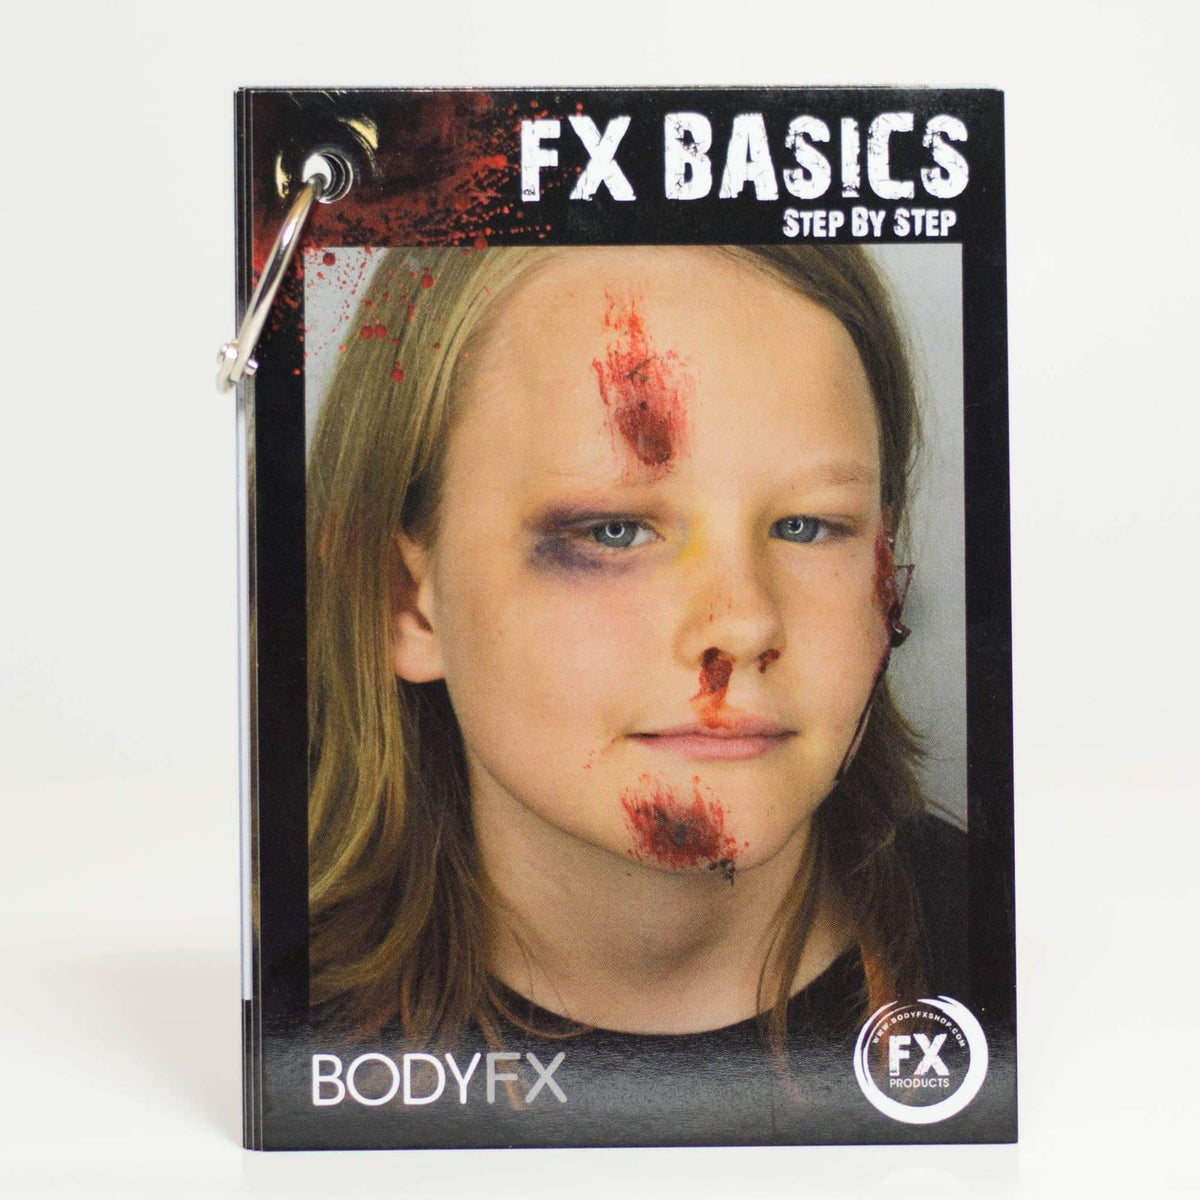 FX BASICS the step by step guide to Basic Special Effects Makeup